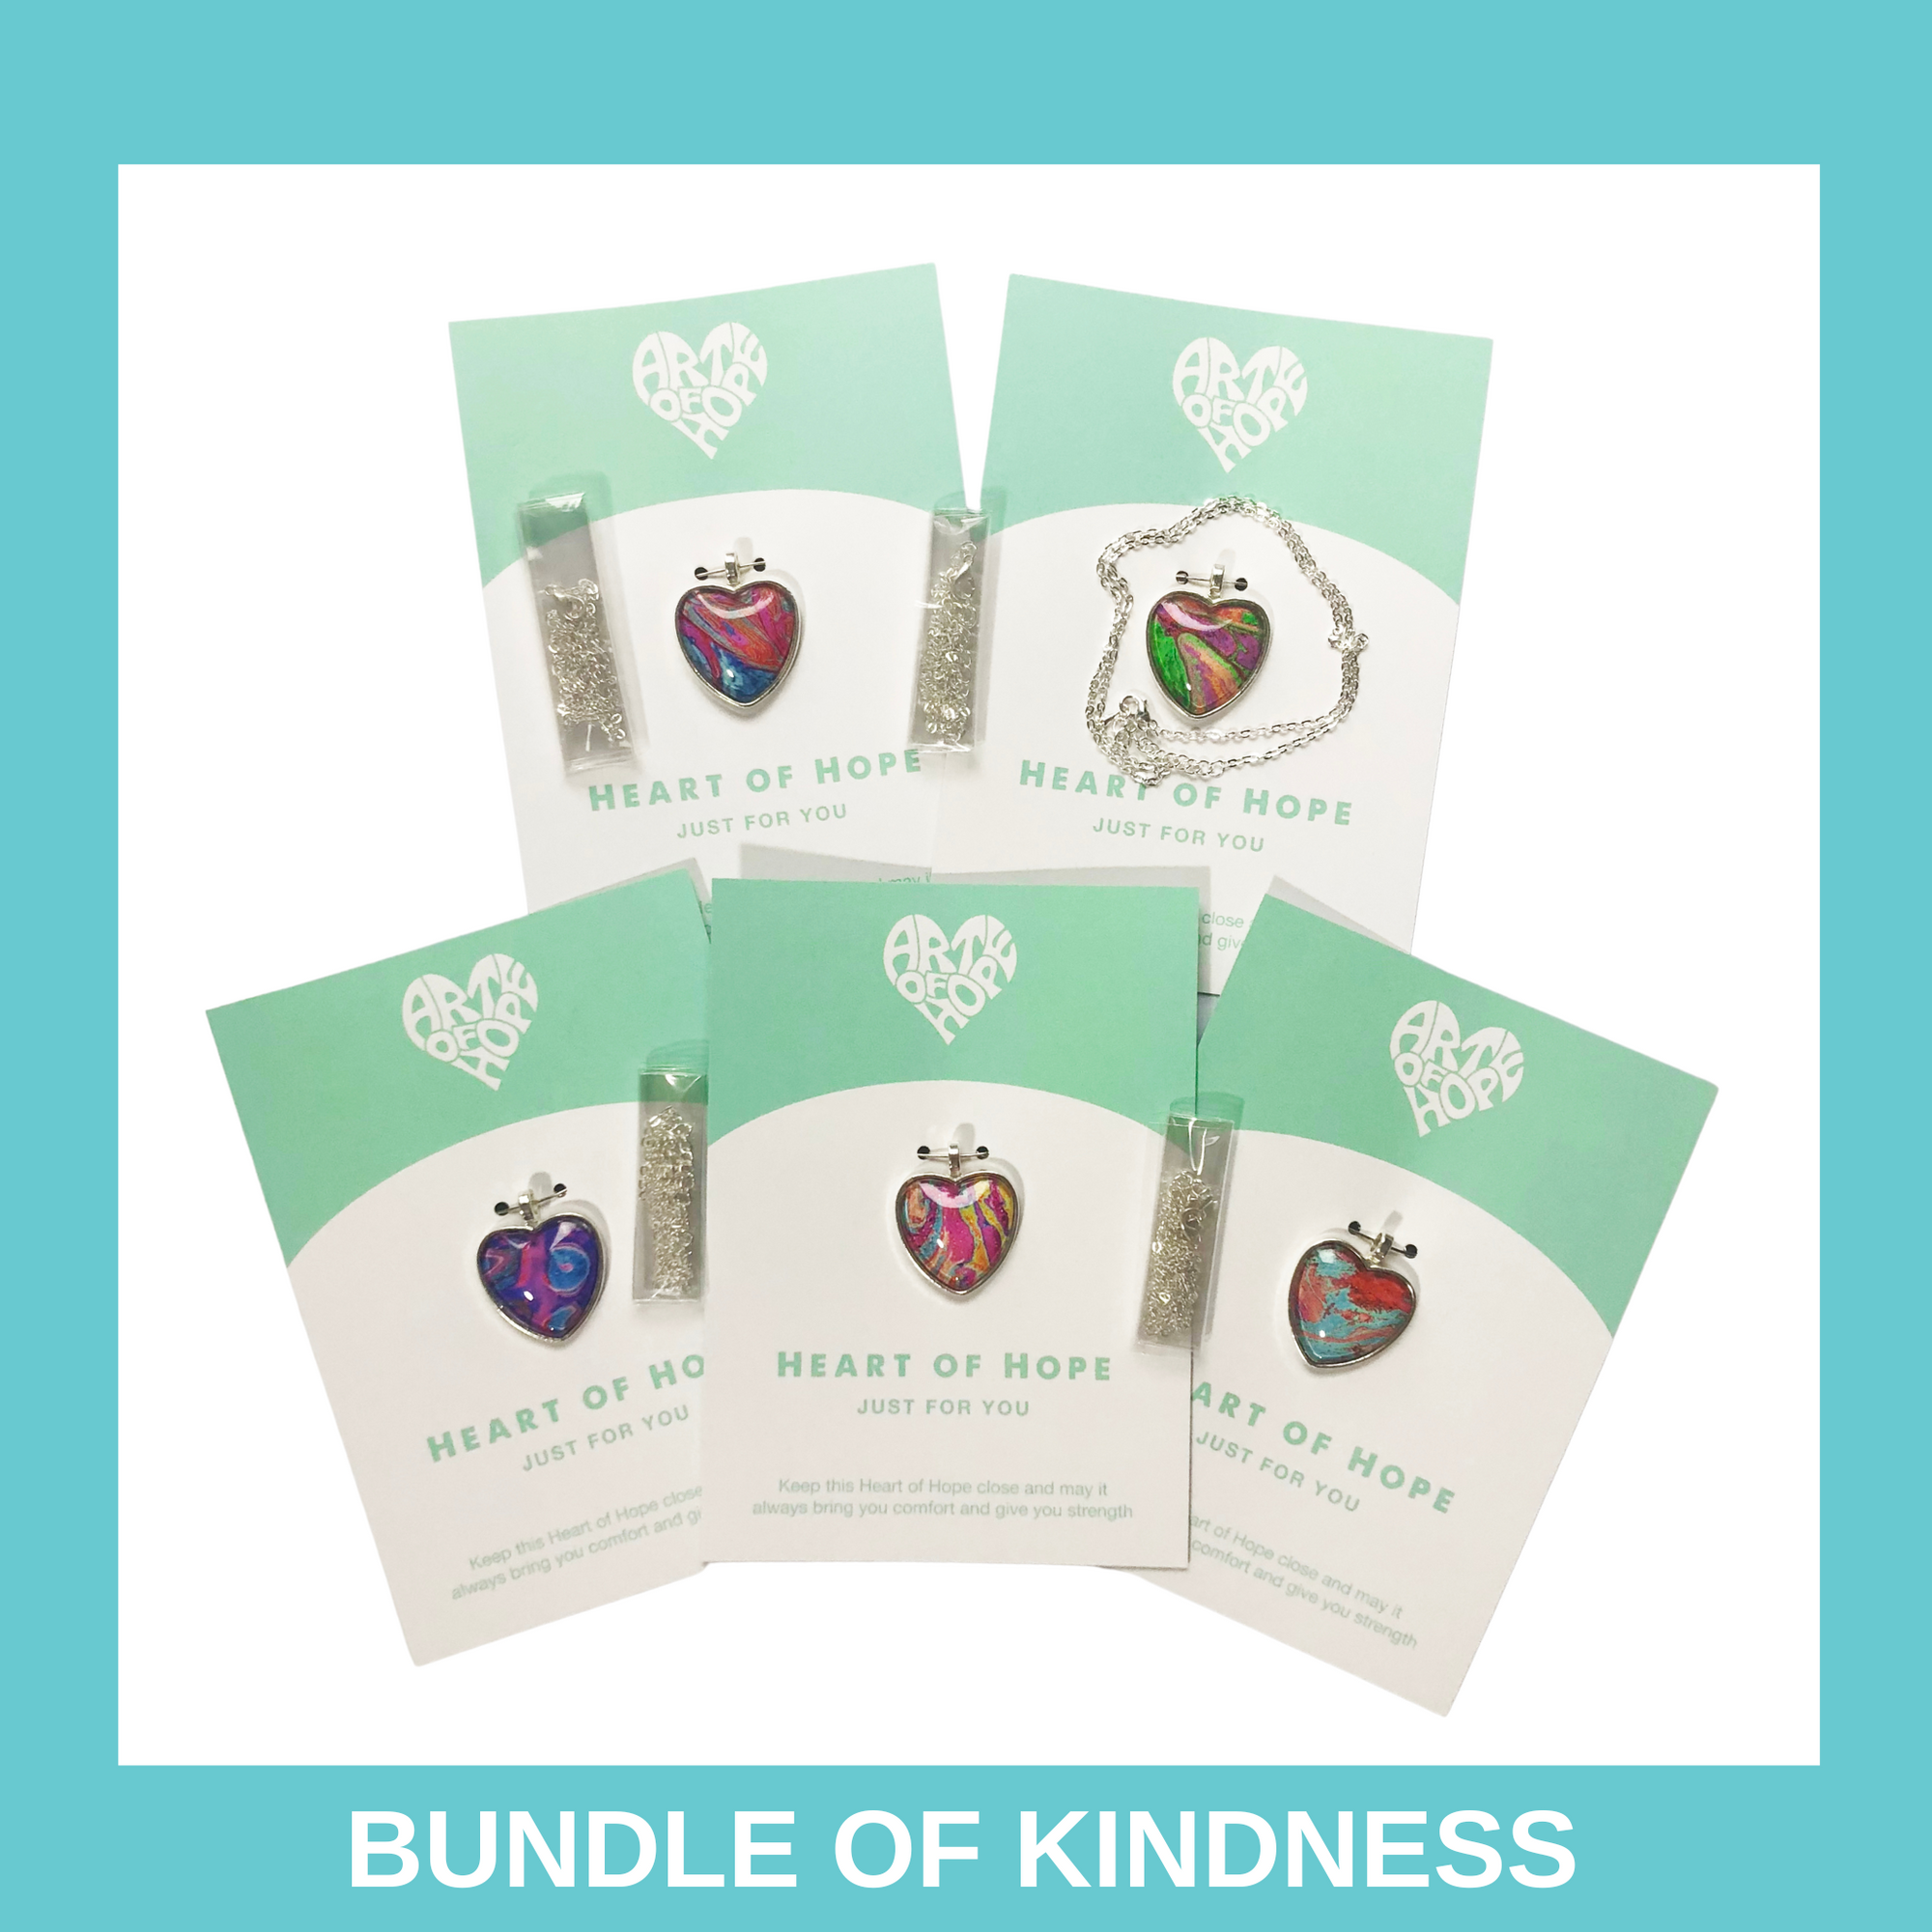 BUNDLES OF COMPASSION, COMFORT AND SUPPORT